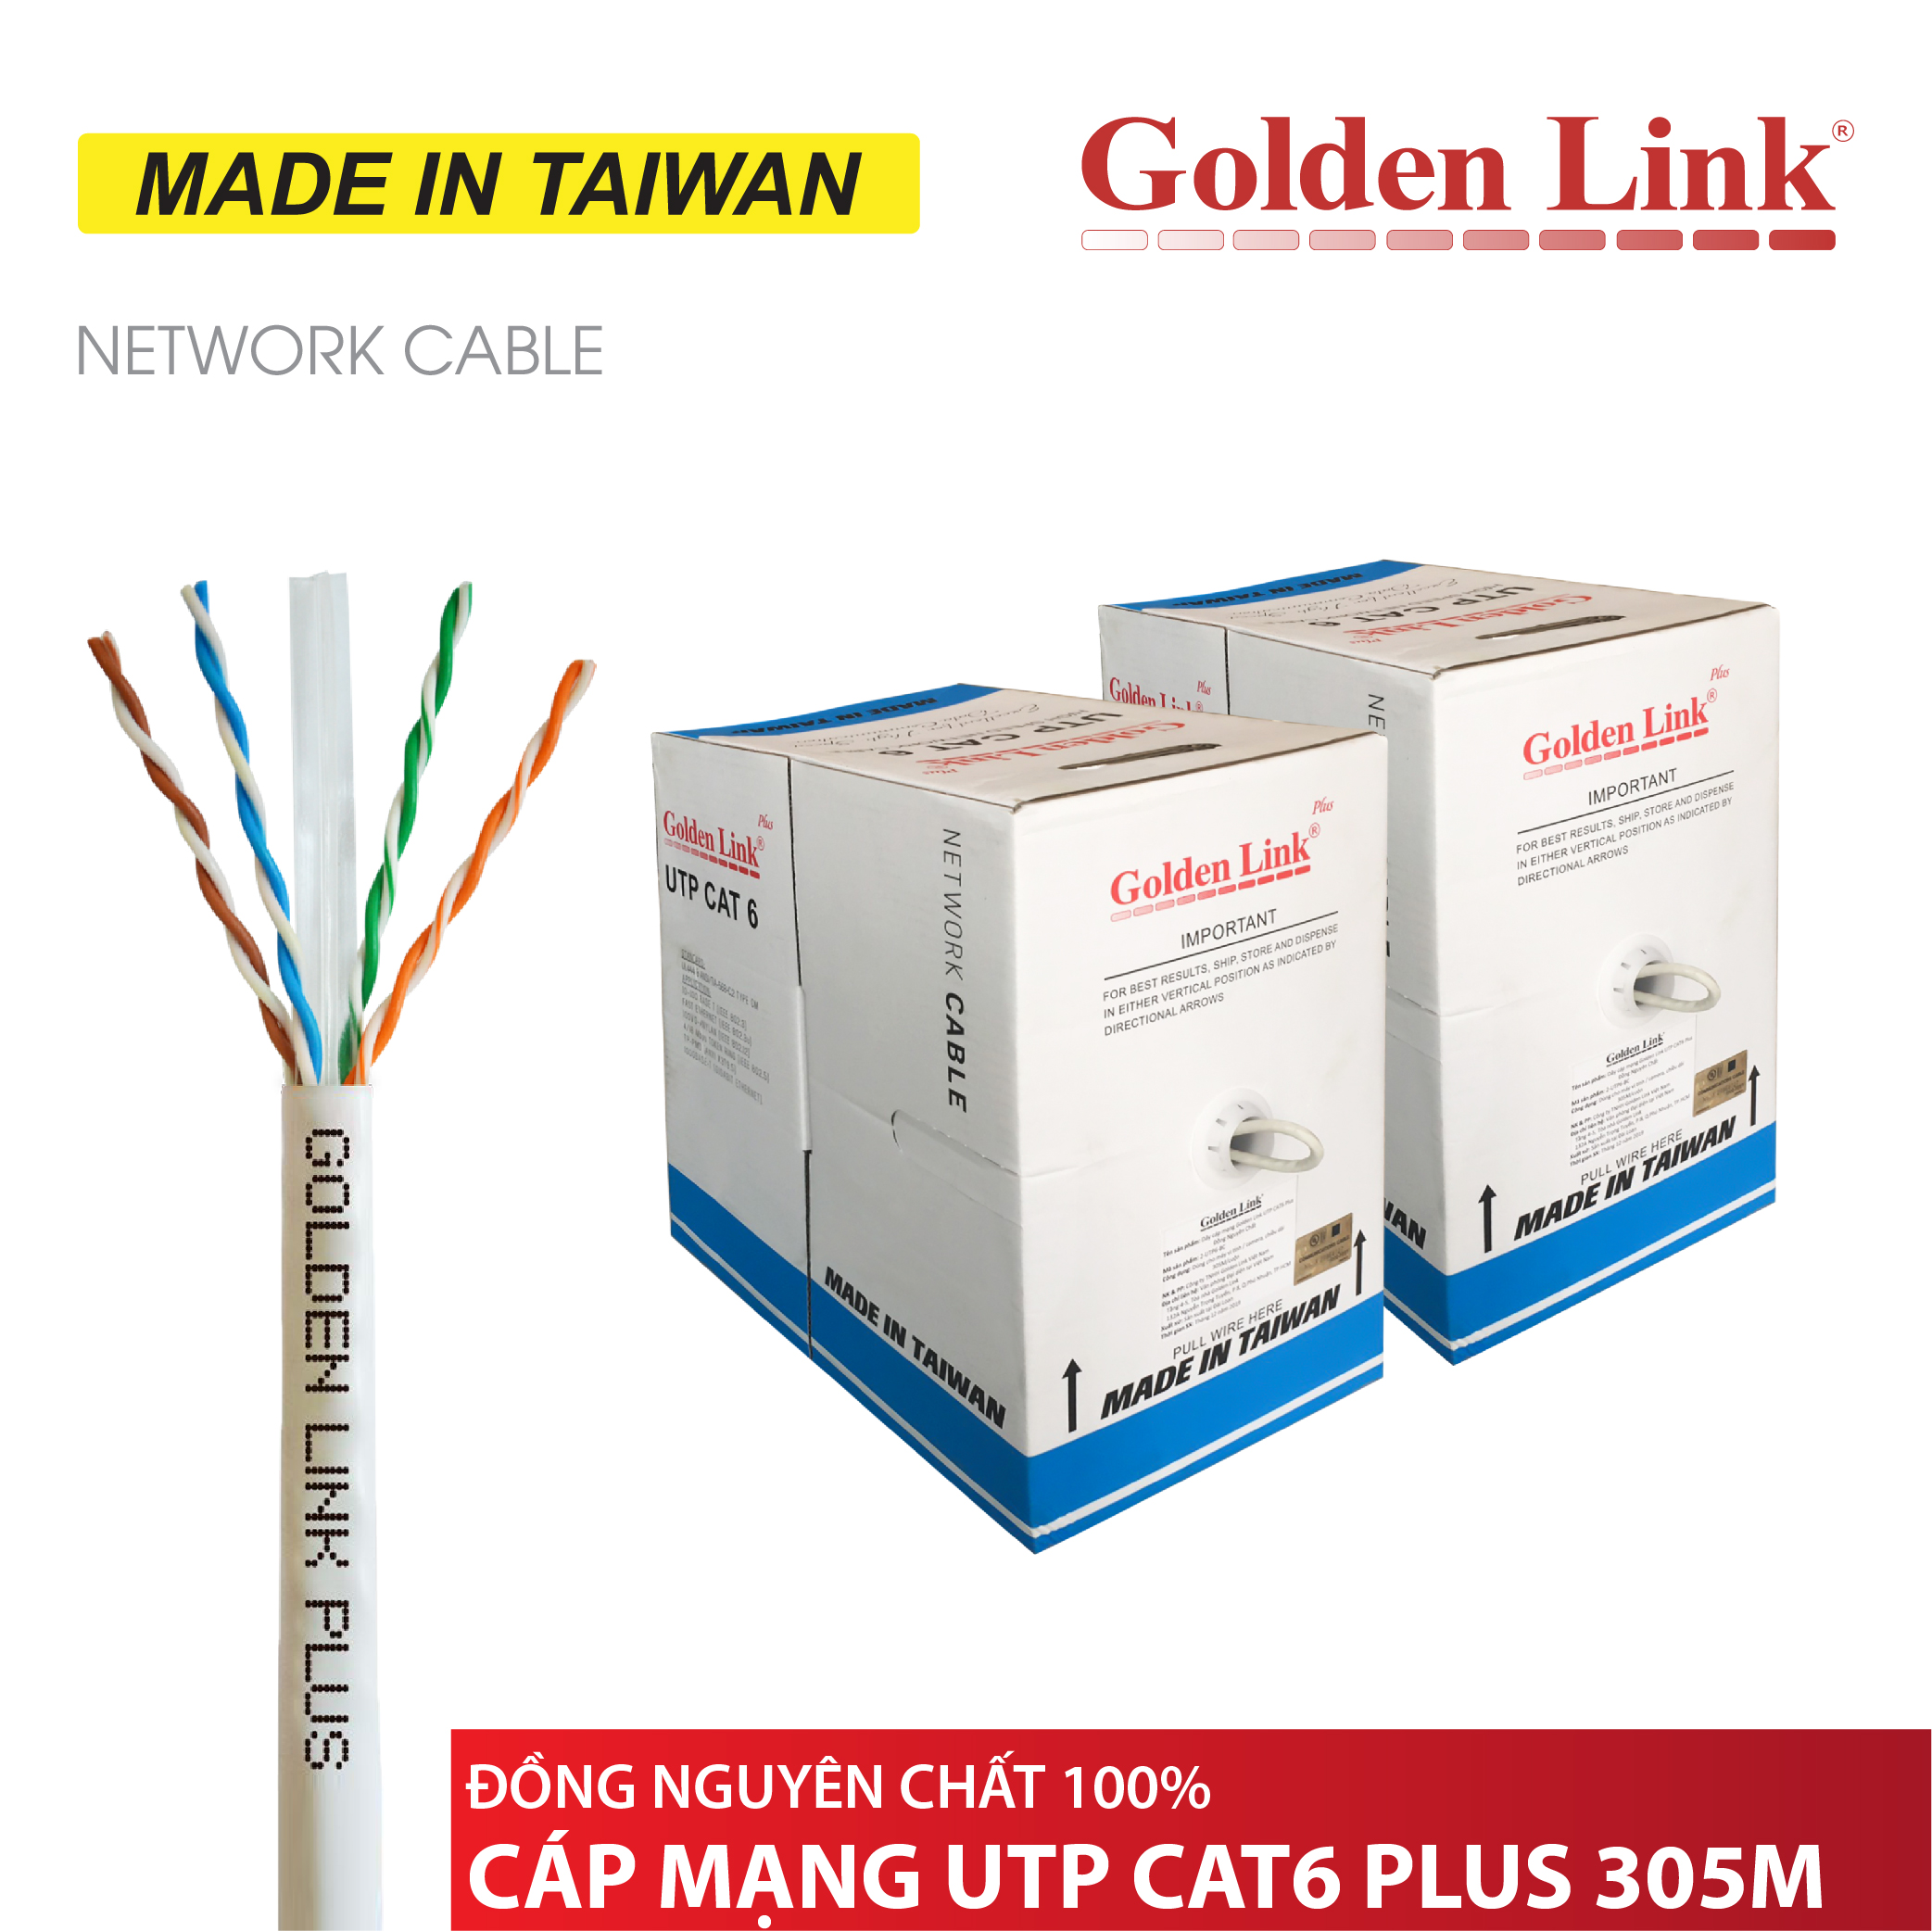 CÁP MẠNG GOLDEN LINK PLUS UTP CAT 6 – MADE IN TAIWAN